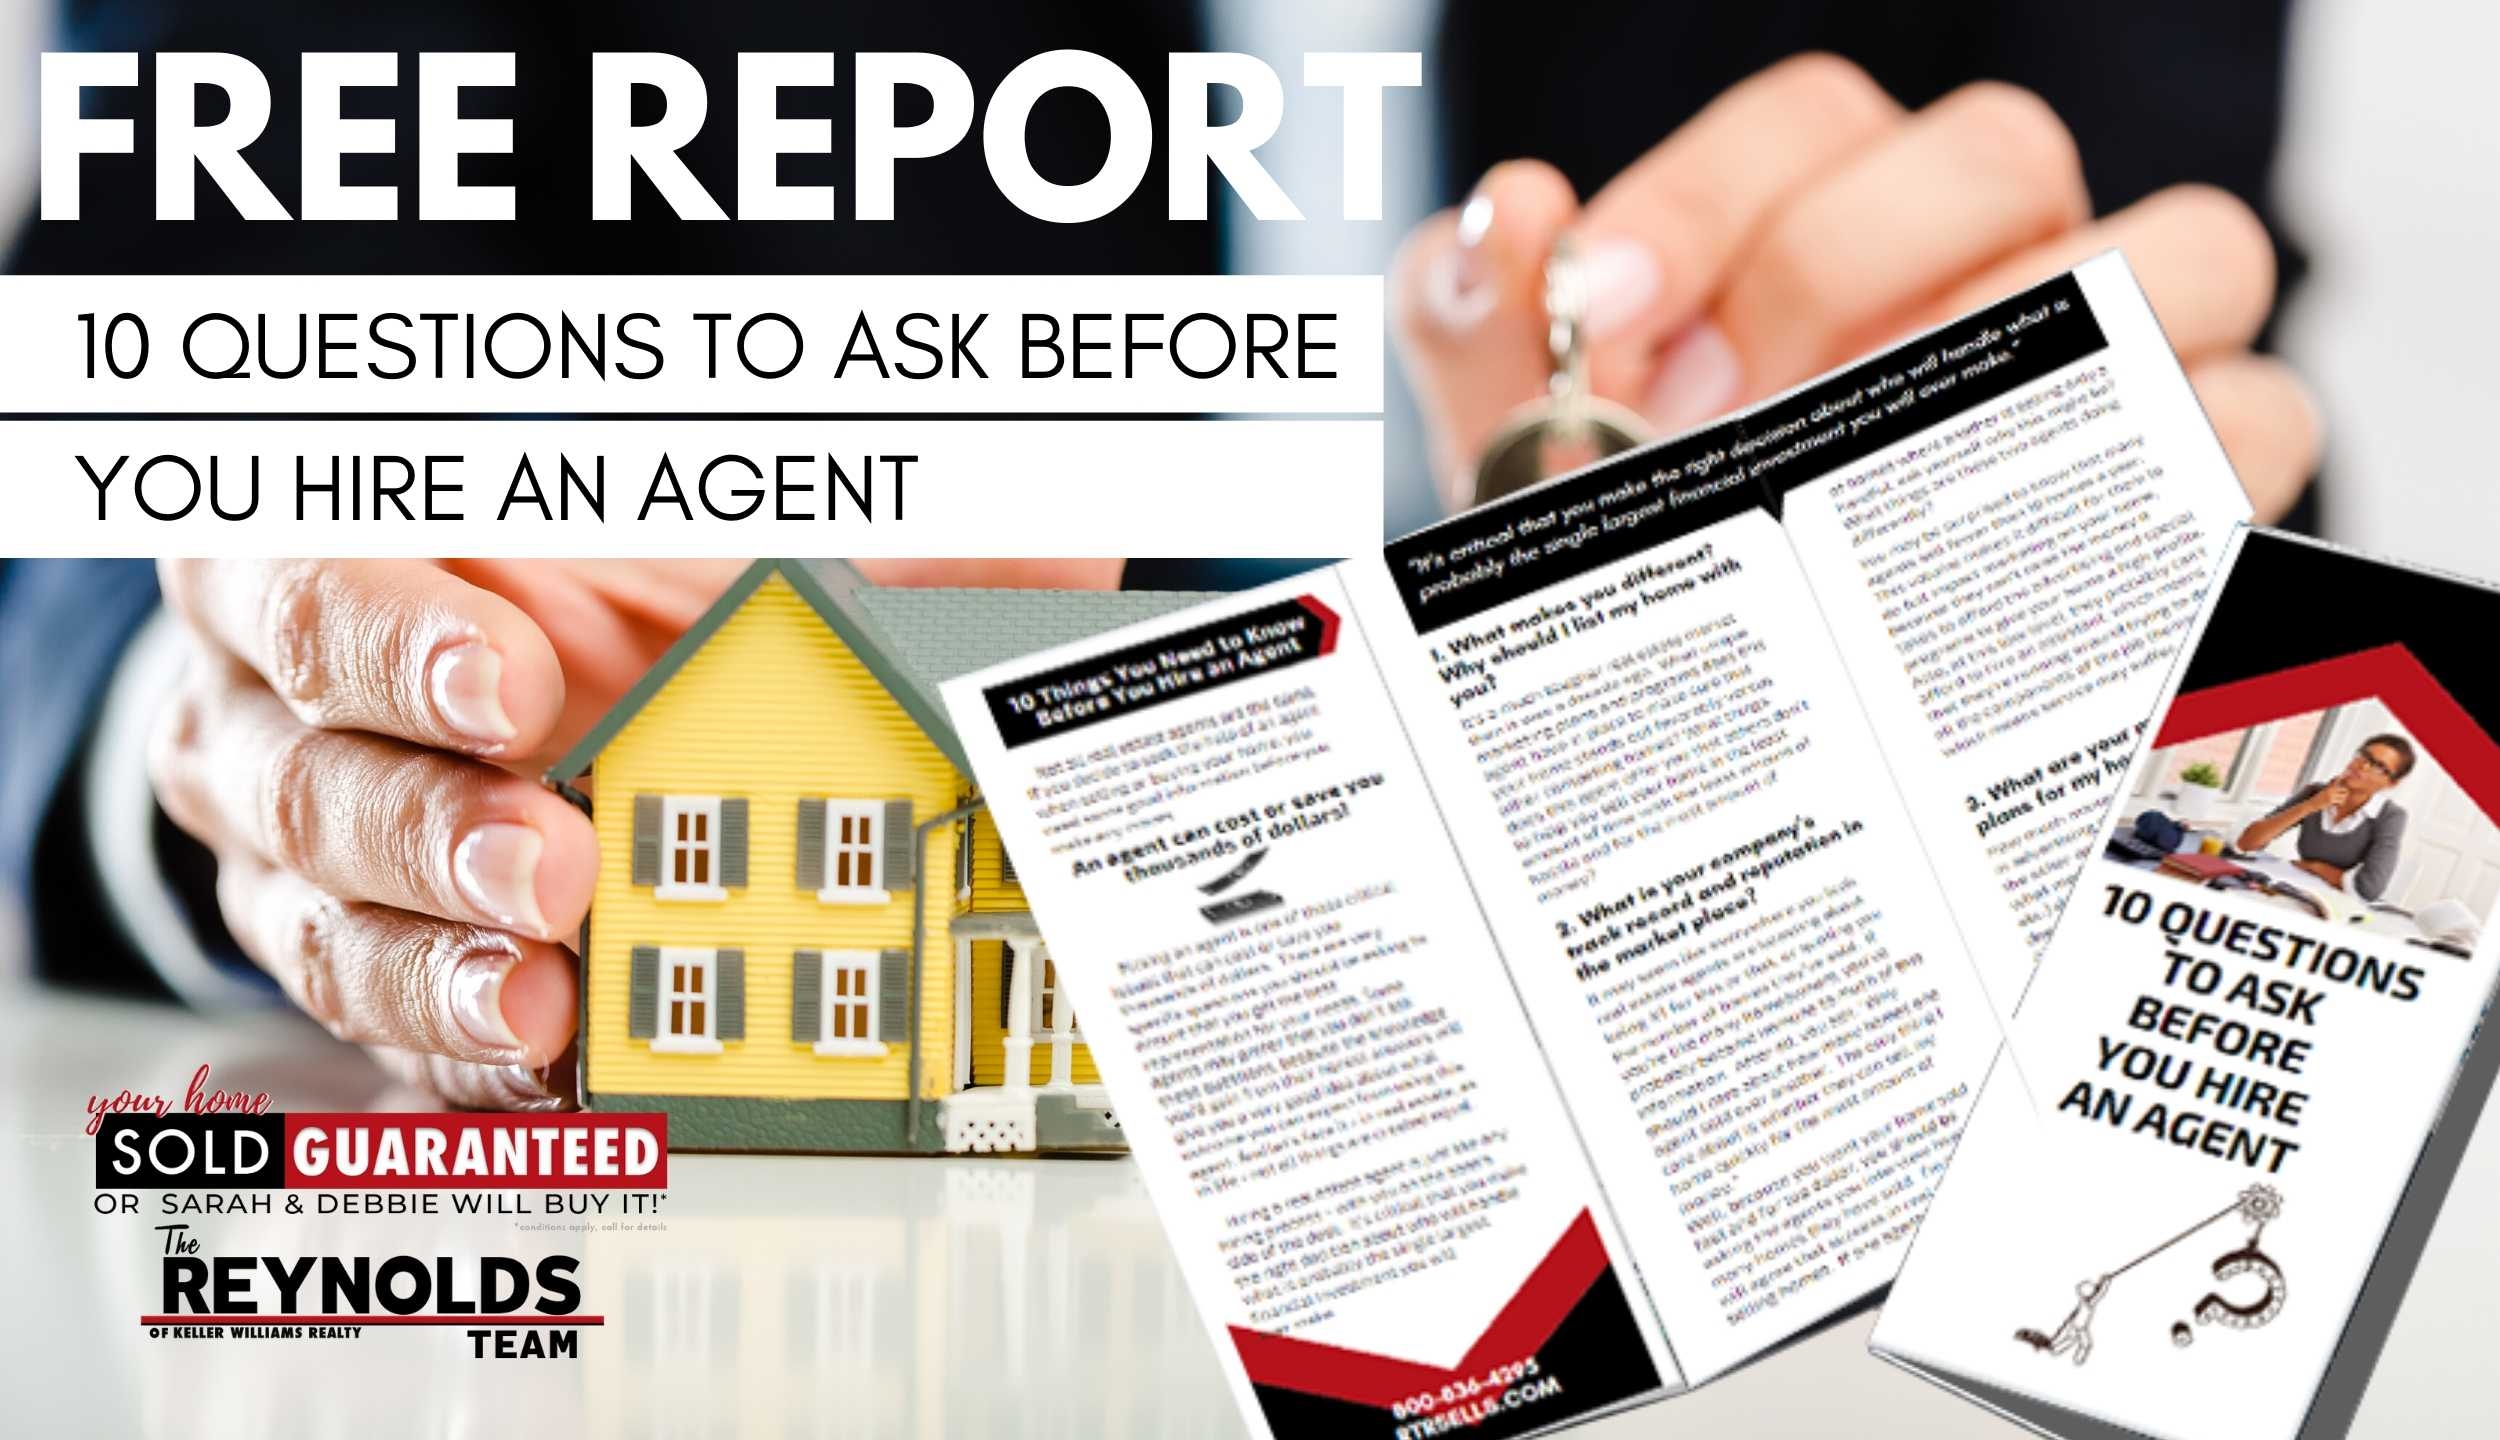 10 Questions to Ask Before You Hire an Agent